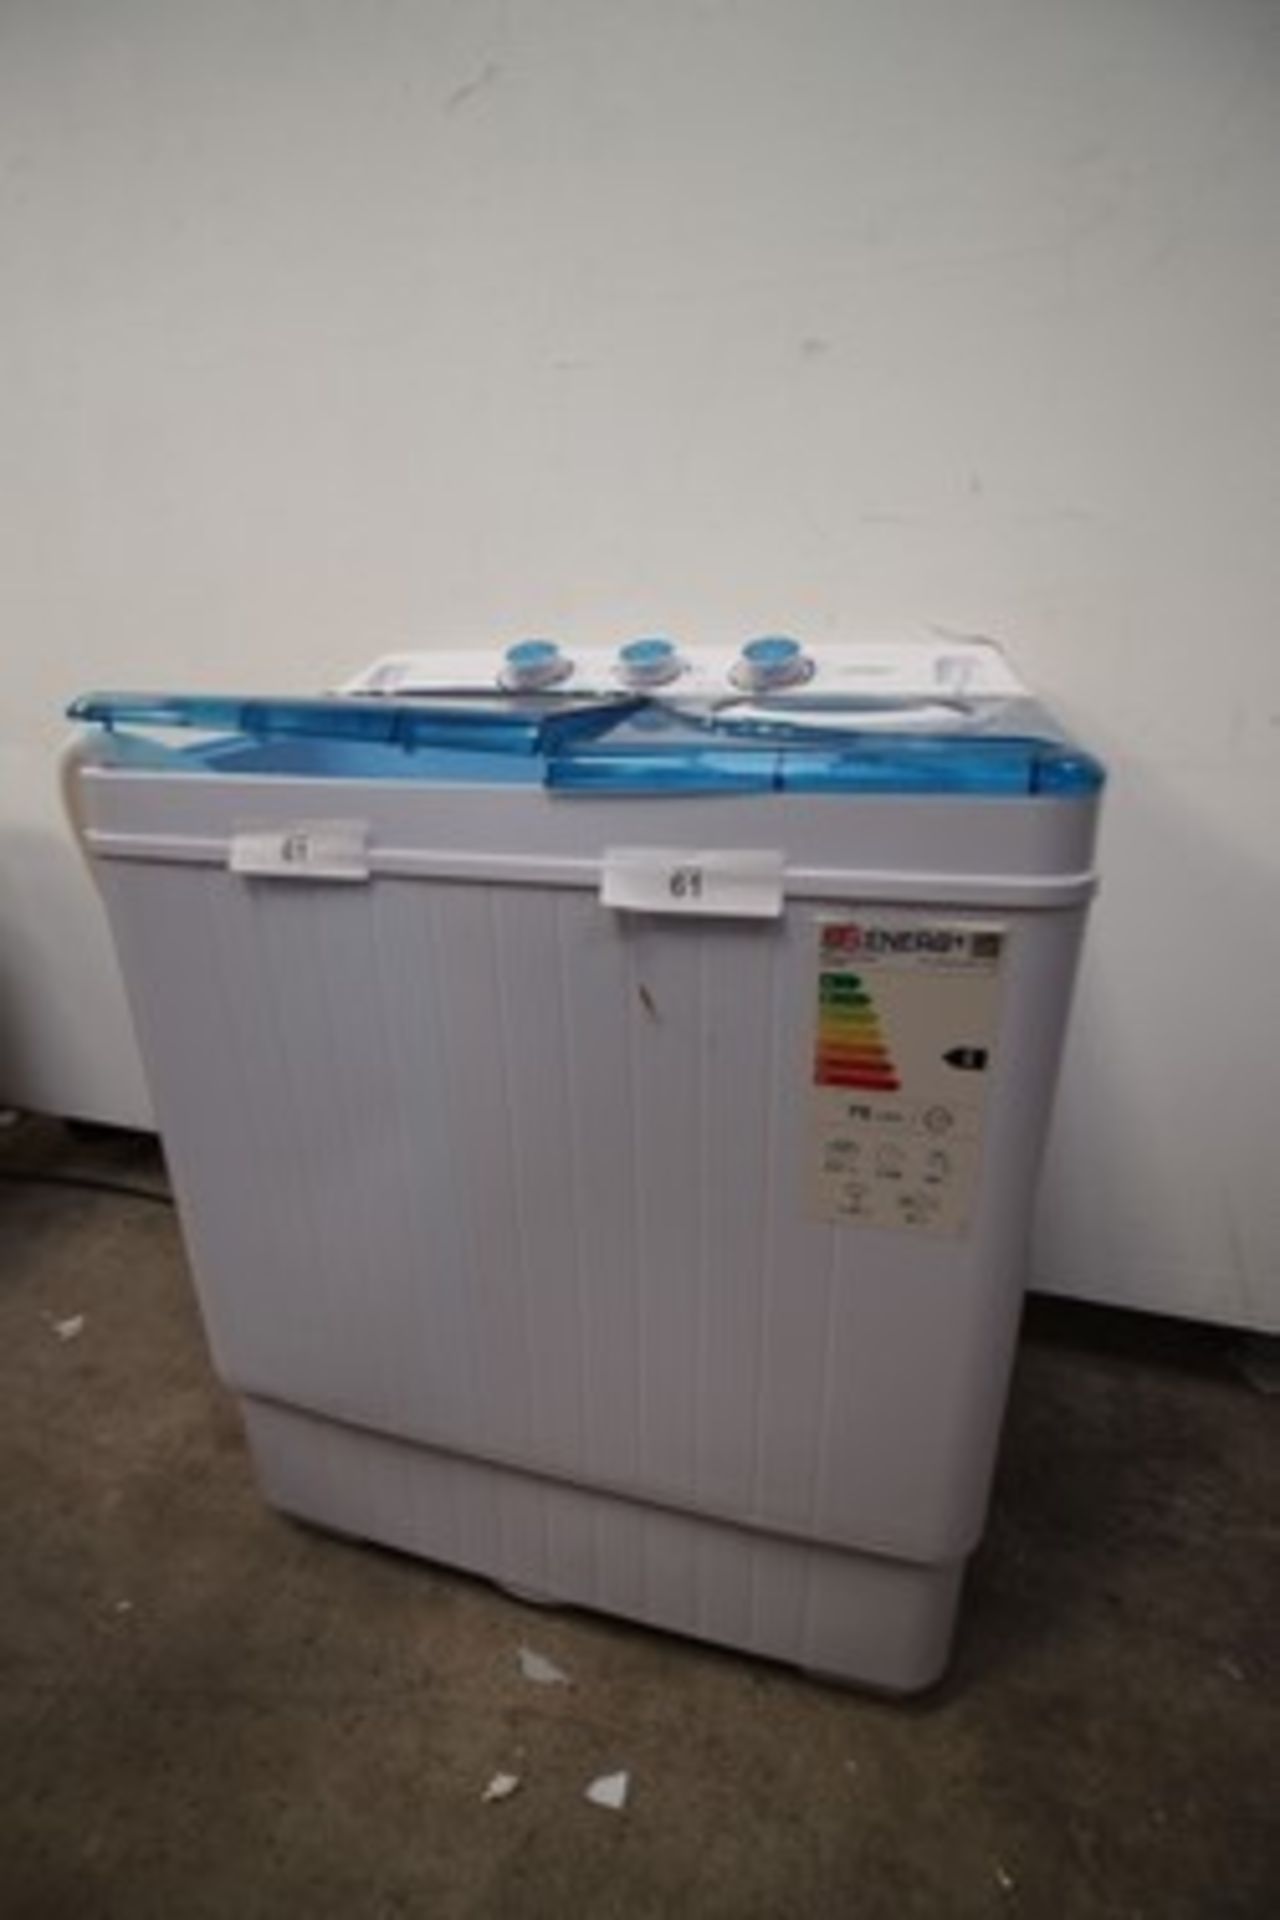 1 x Costway portable washing machine, cracked case top right, model No: FP10366GB, 6.5kg capacity,